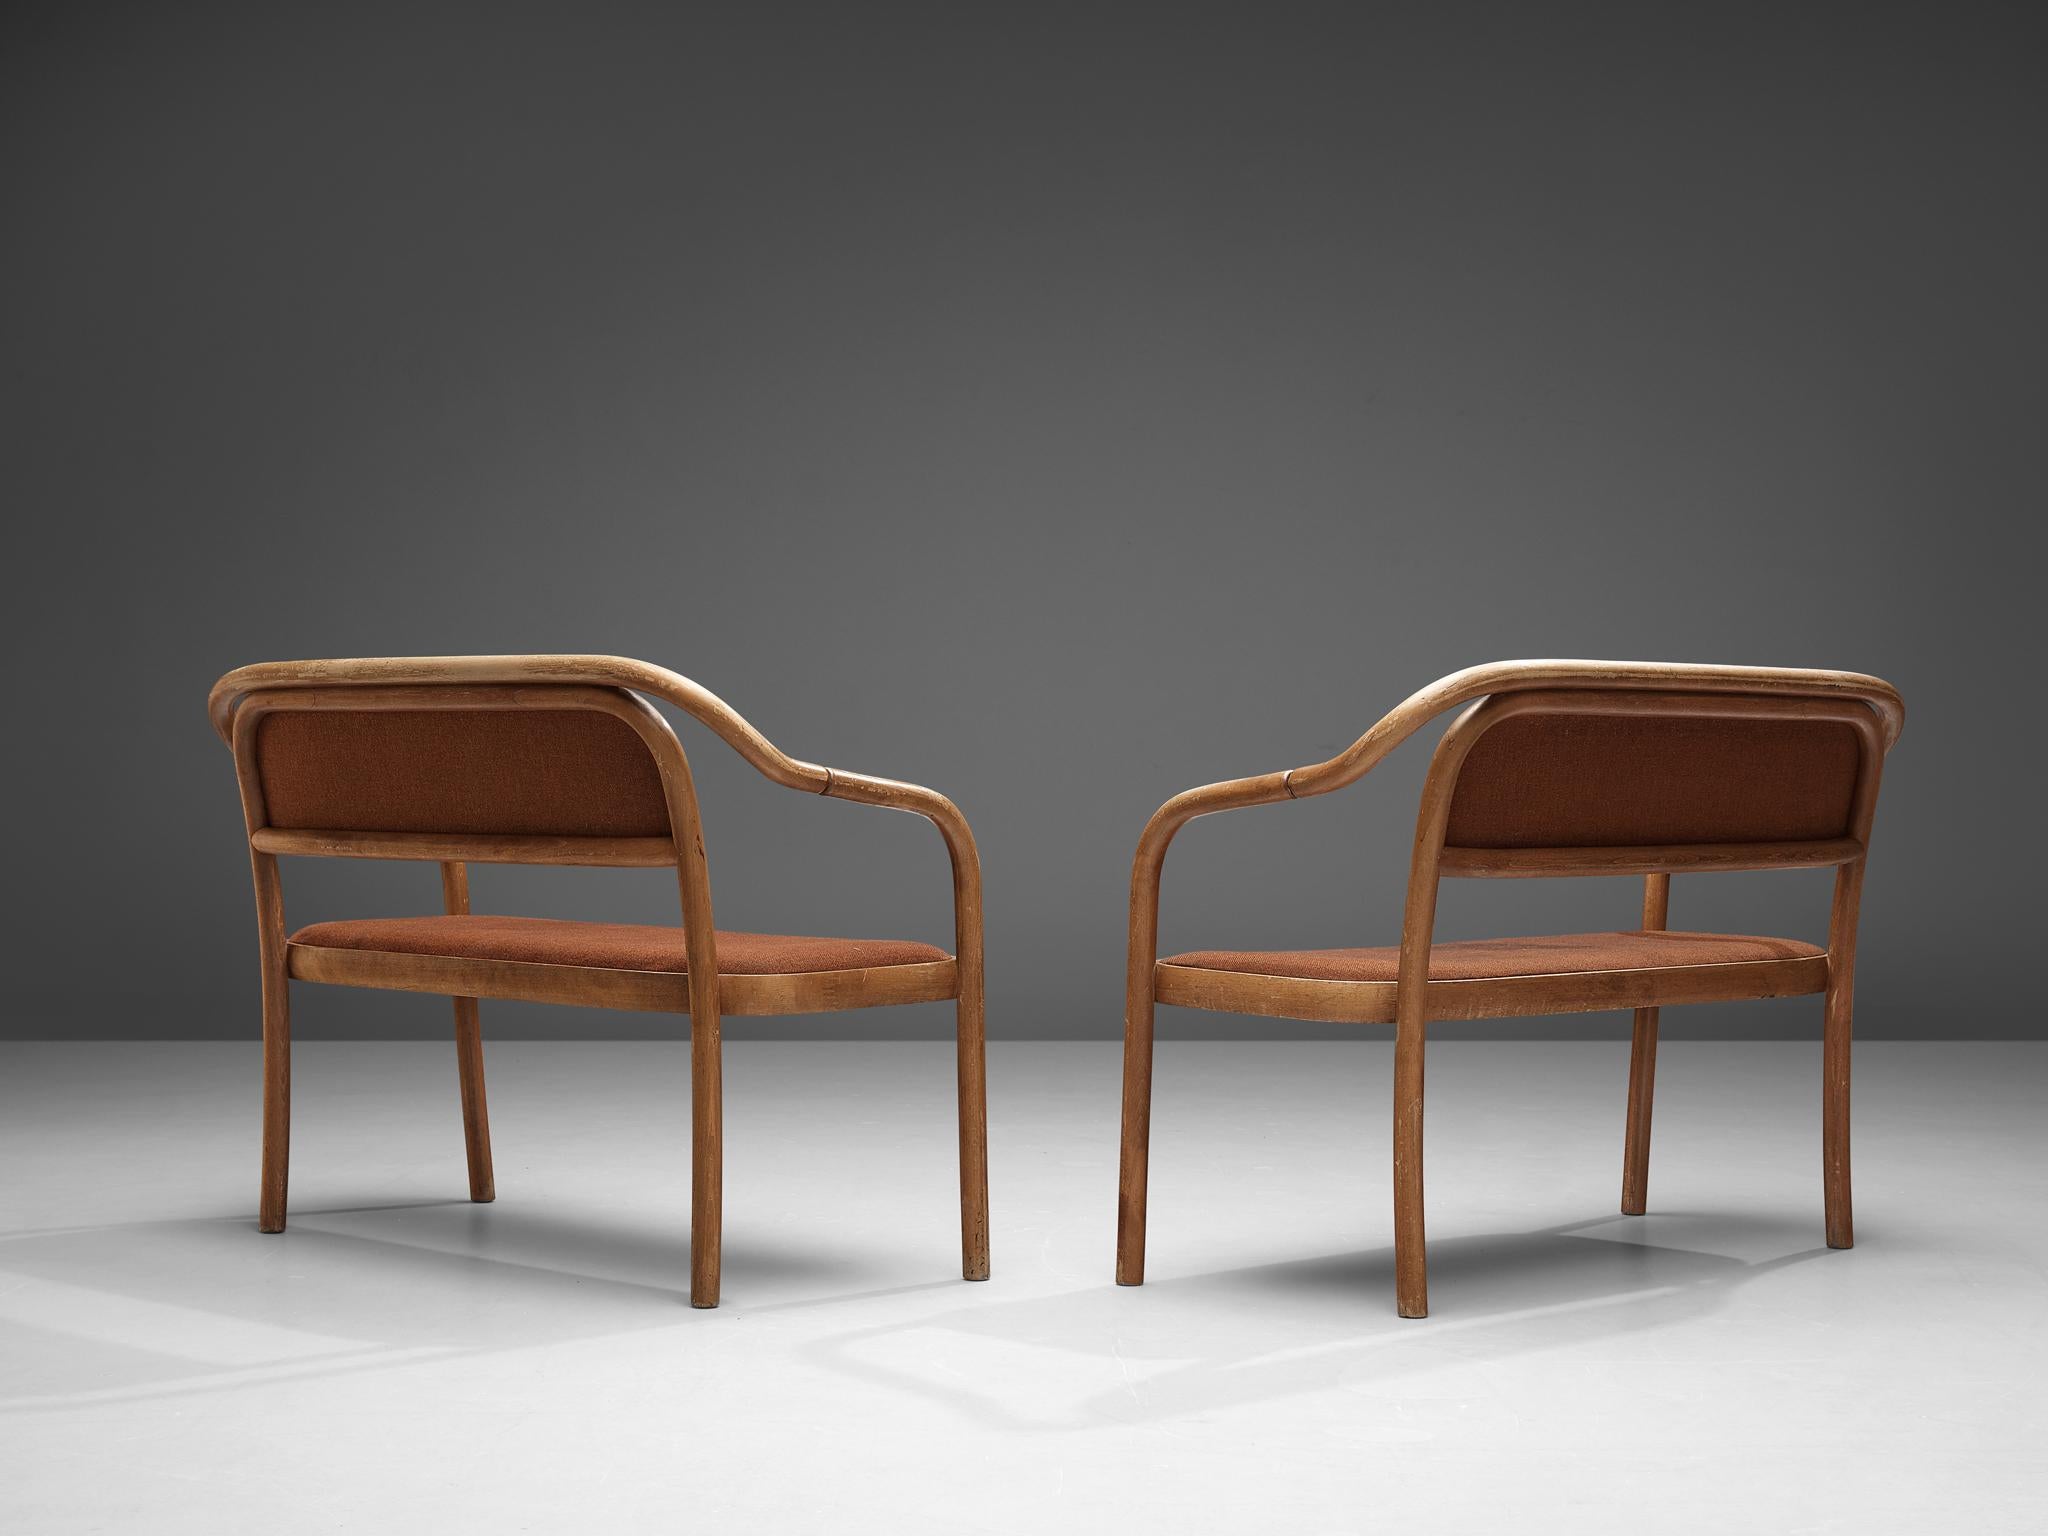 Antonín Šuman for TON, benches, bentwood, fabric upholstery, Czech Republic, 1977

Admirable benches designed by Antonín Šuman and manufactured by TON in the 1970s. The bench features a wonderful bentwood frame. Engraved rings add a subtle detail to